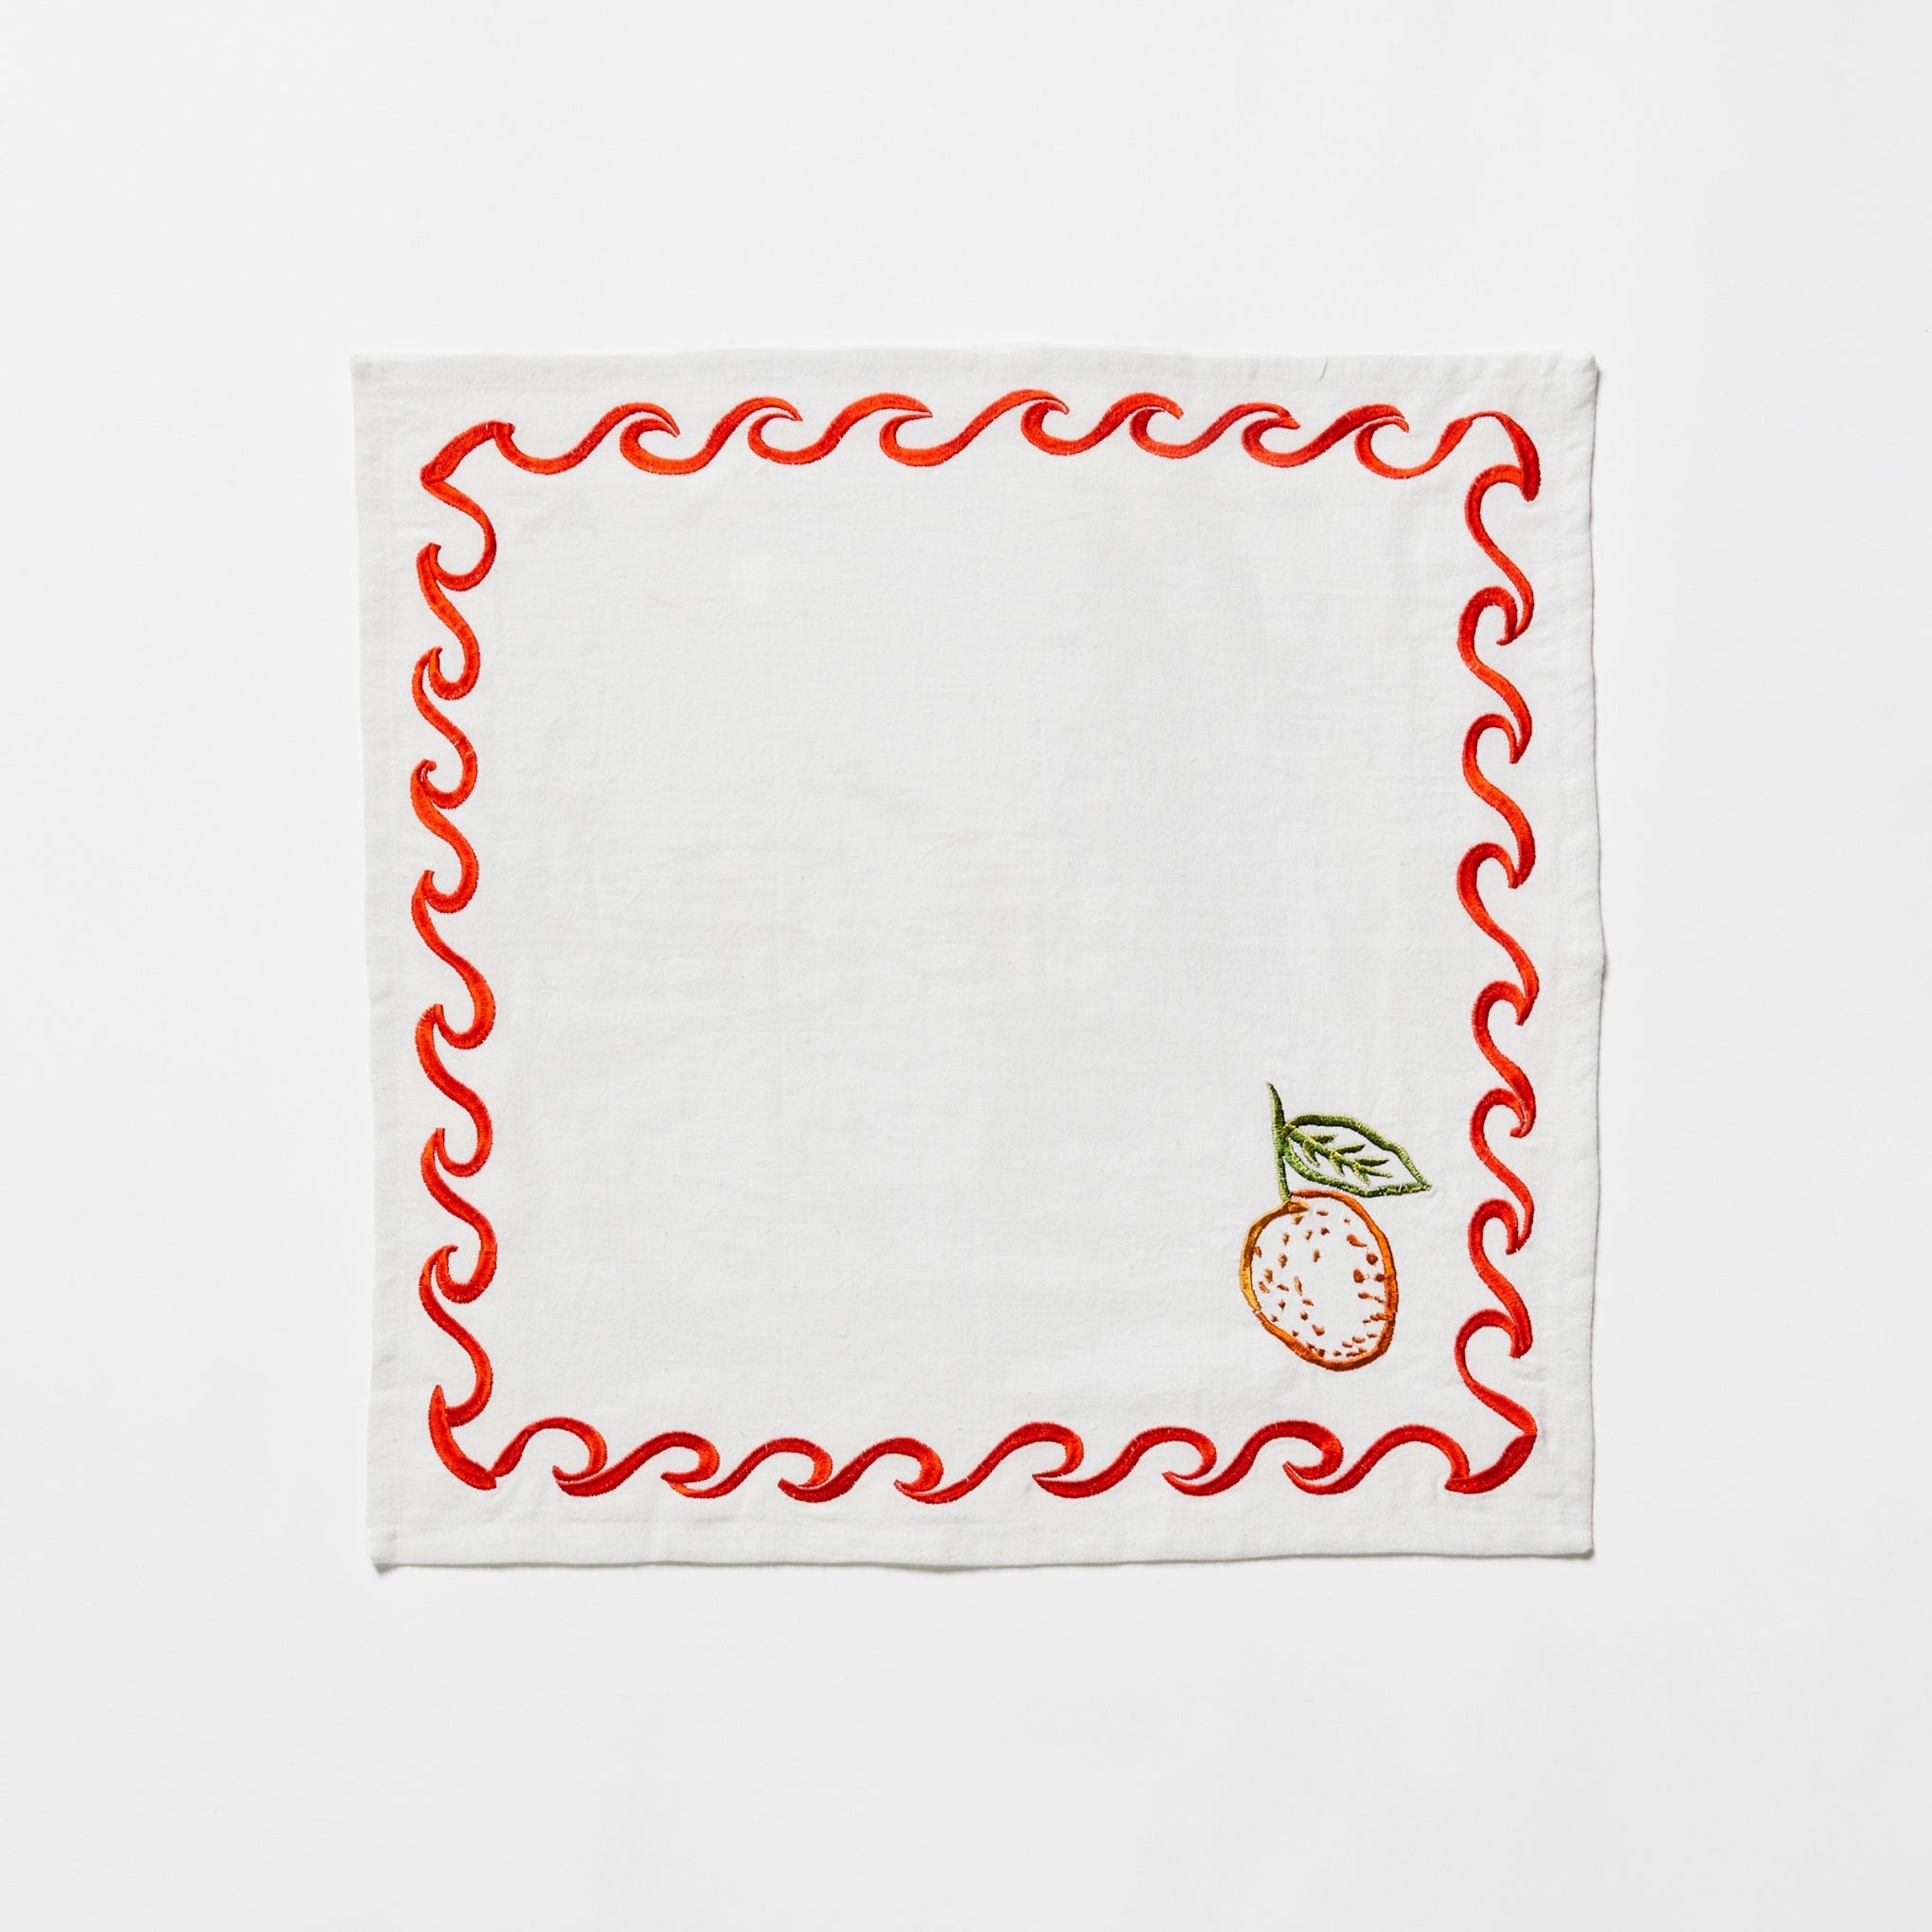 Mixed Surf Embroidered Napkins (set of 6)